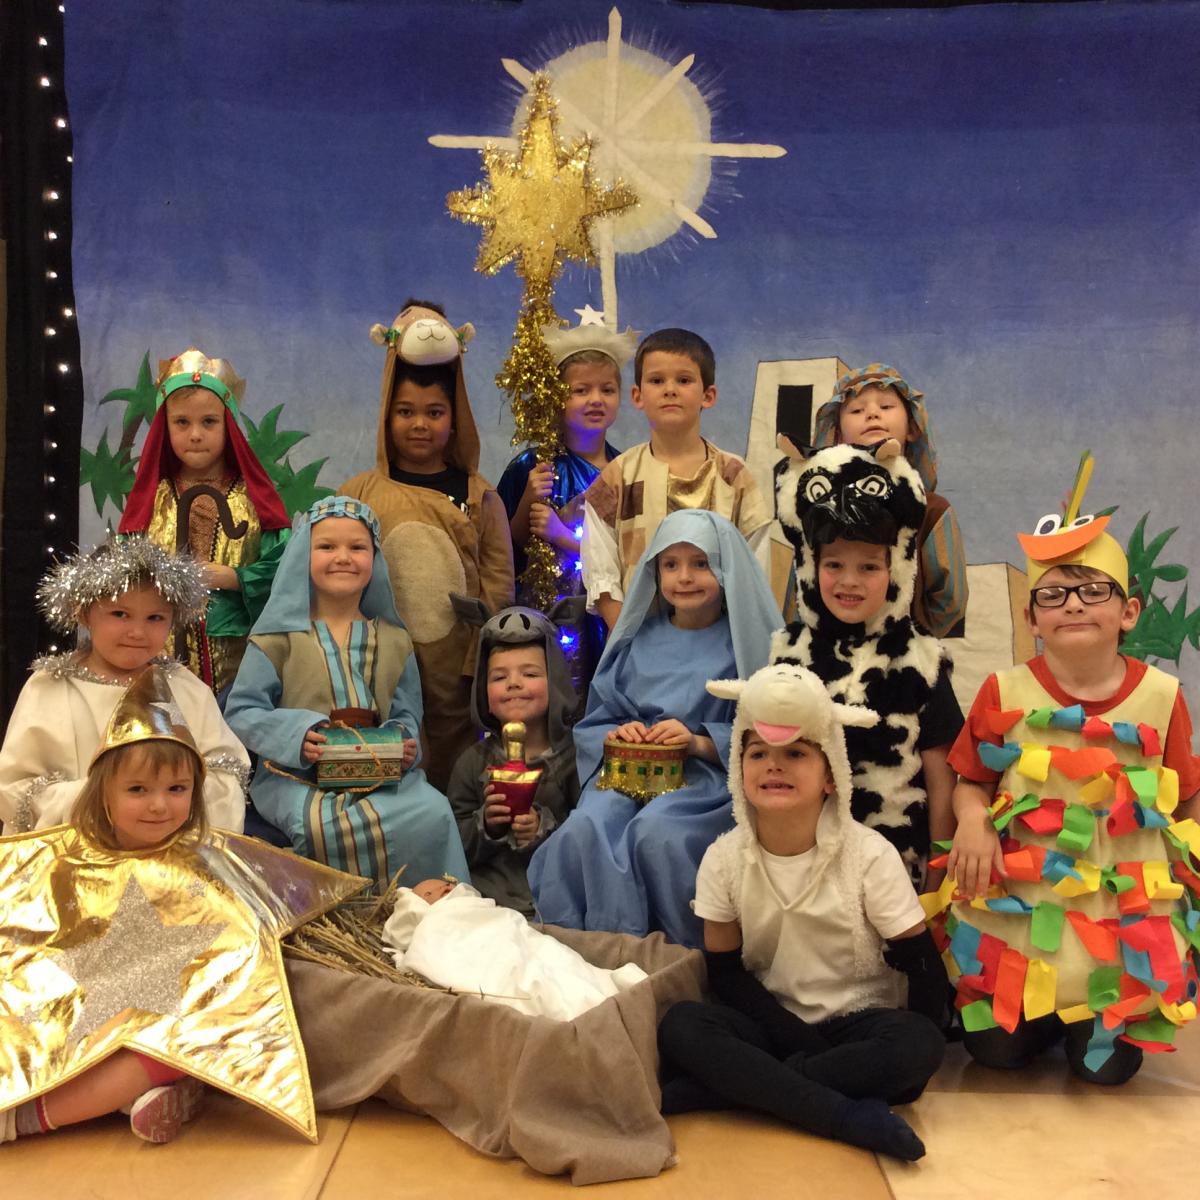 KS1 pupils from Clehonger Primary School performed The Wriggly Nativity